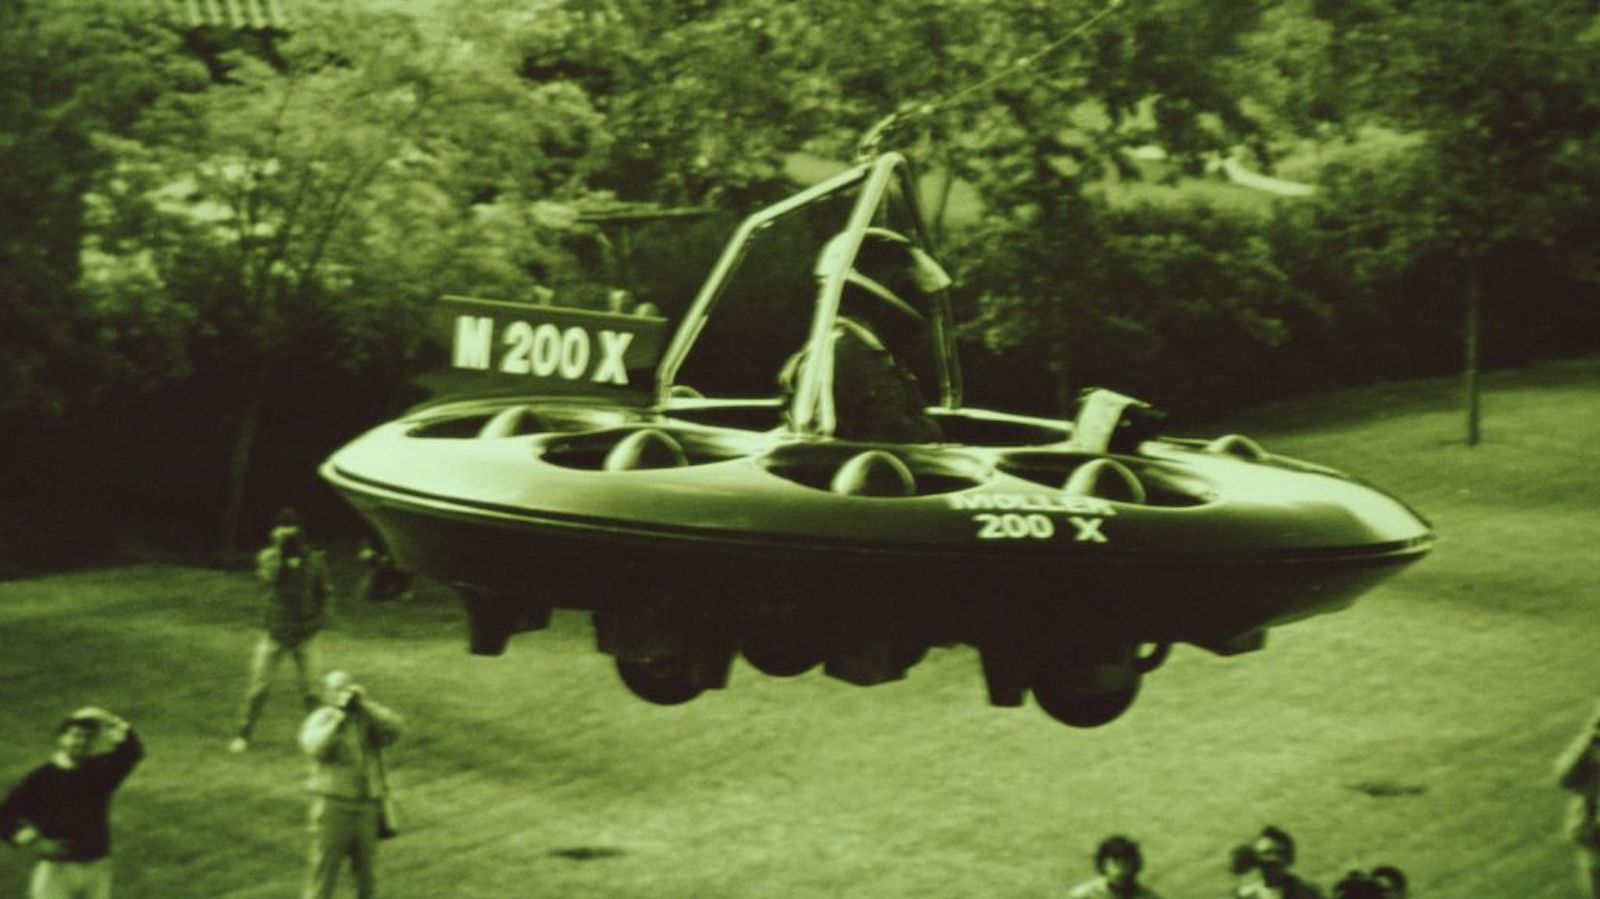 Paul Moller's very first prototype, the M200X, is a sort of vertical-takeoff flying saucer.